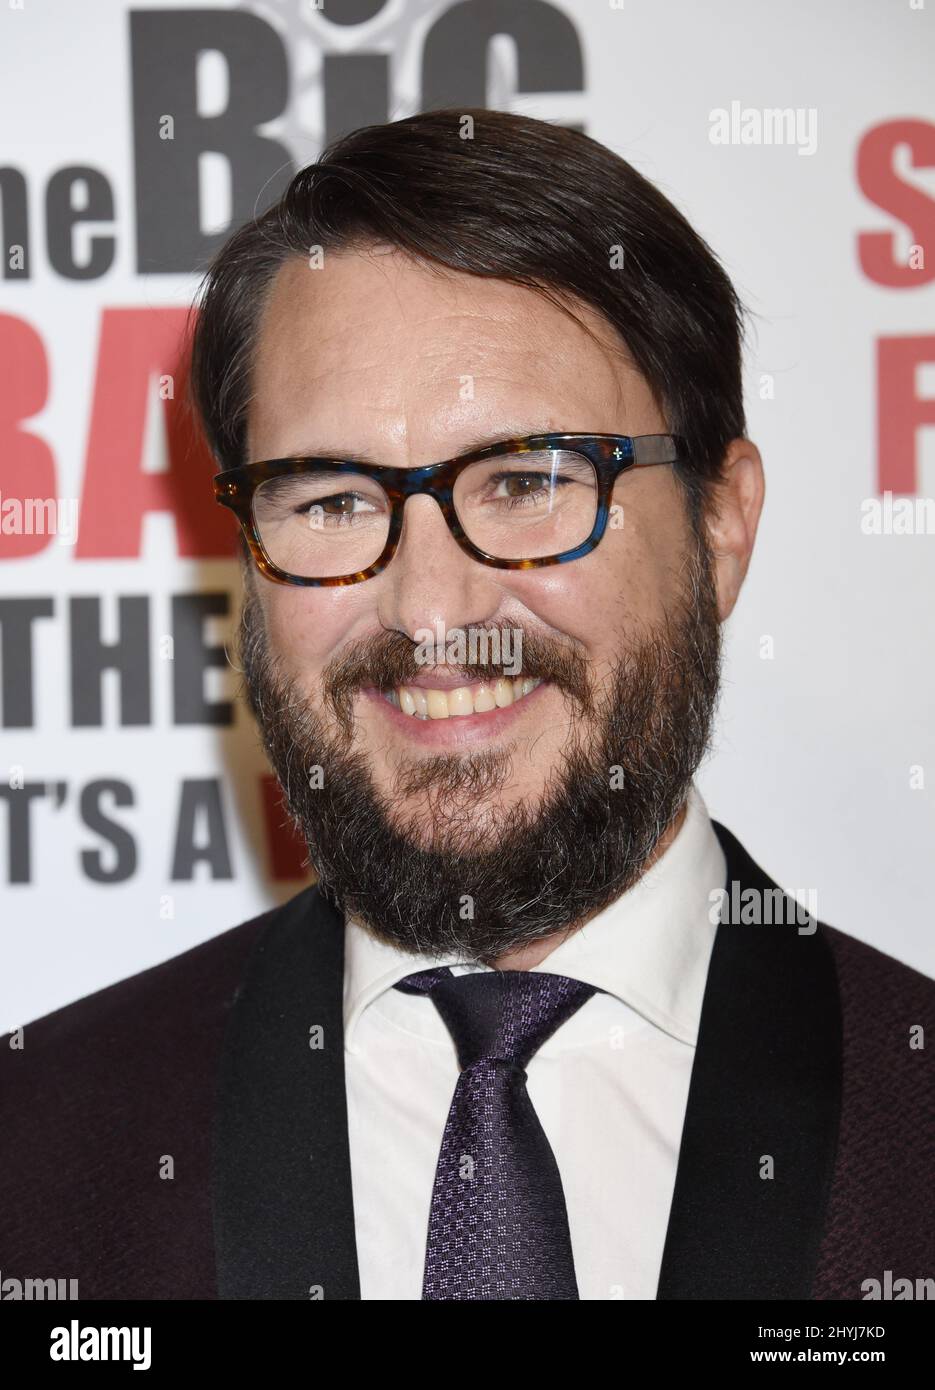 Wil Wheaton attending the Big Bang Theory Series Finale Party, held at the Langham Huntington Hotel in Pasadena, California Stock Photo